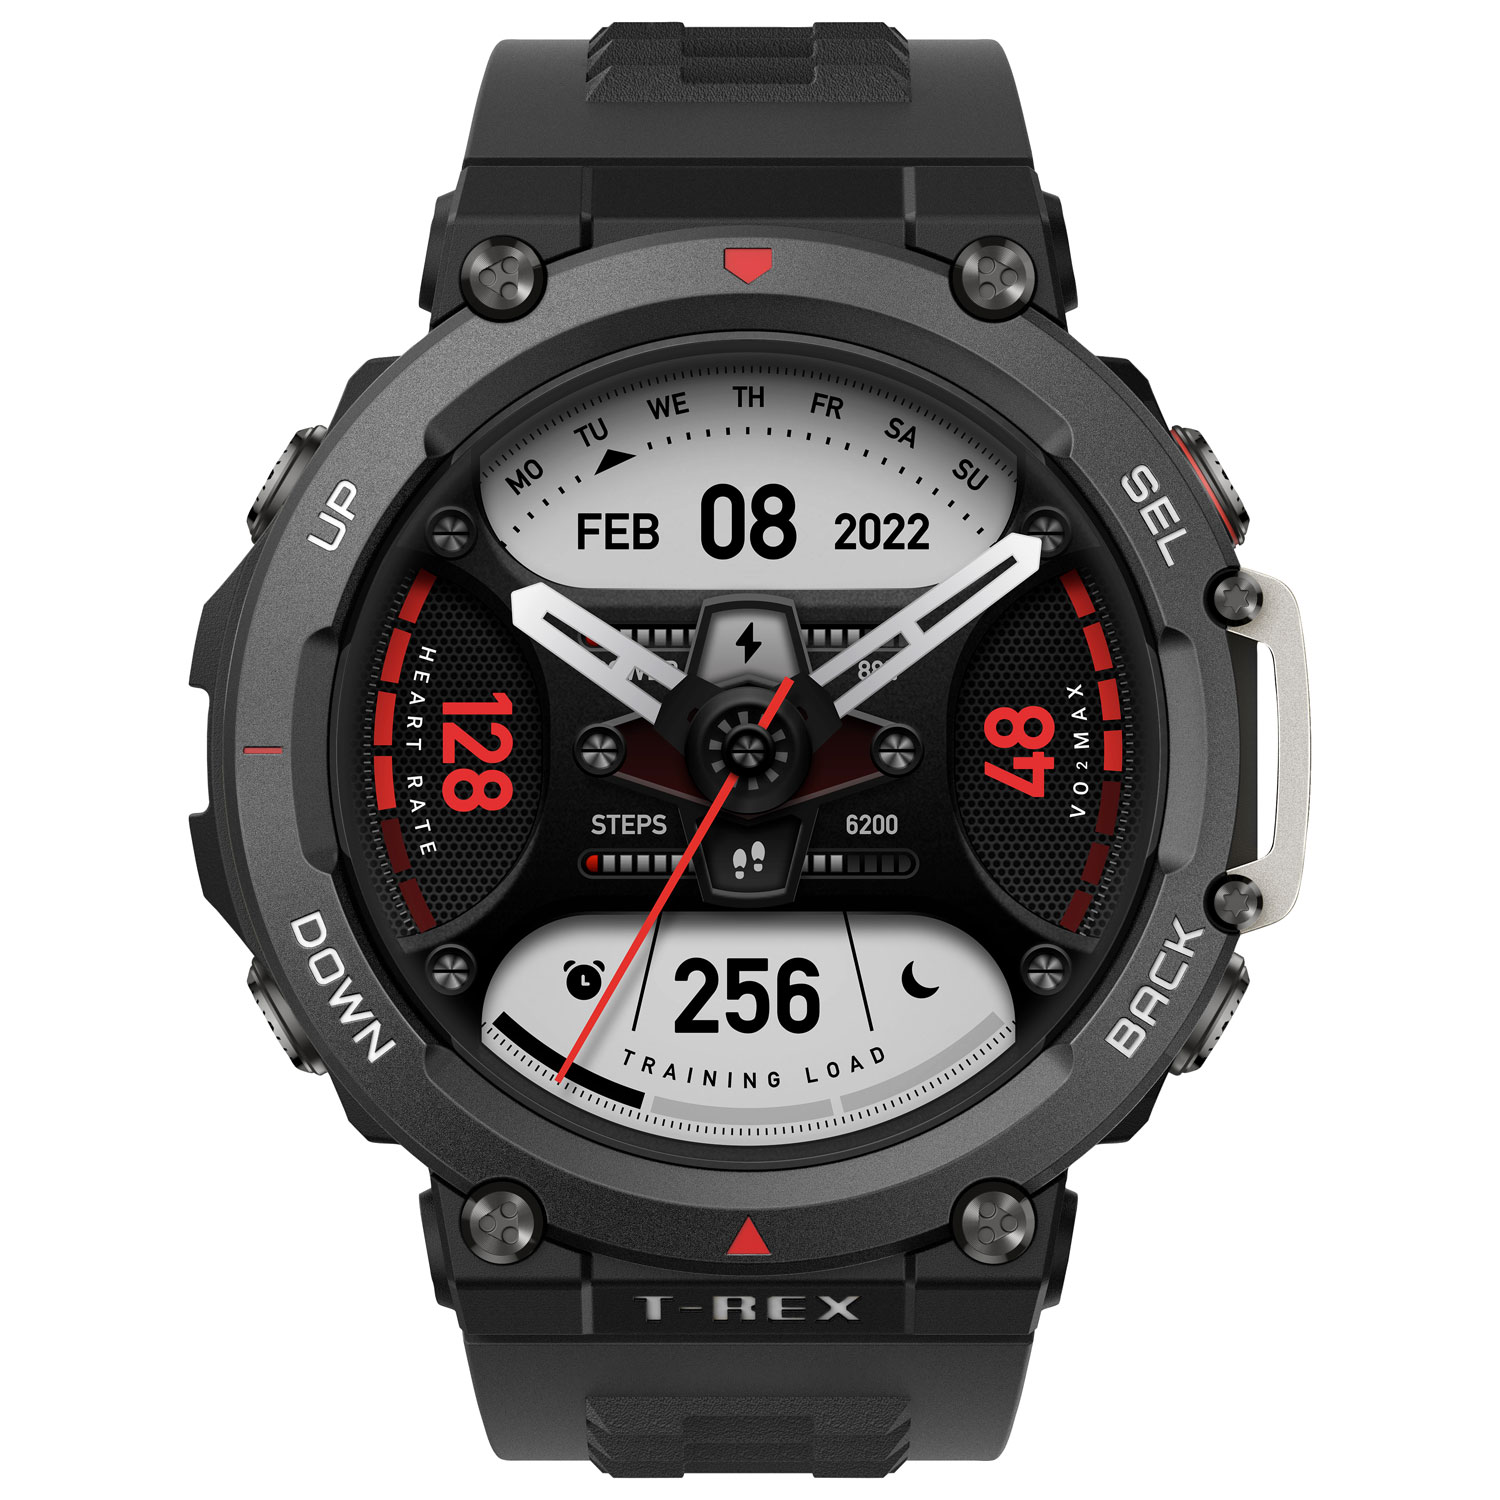 Amazfit T-Rex 2 Smartwatch with Heart Rate Monitor - Black